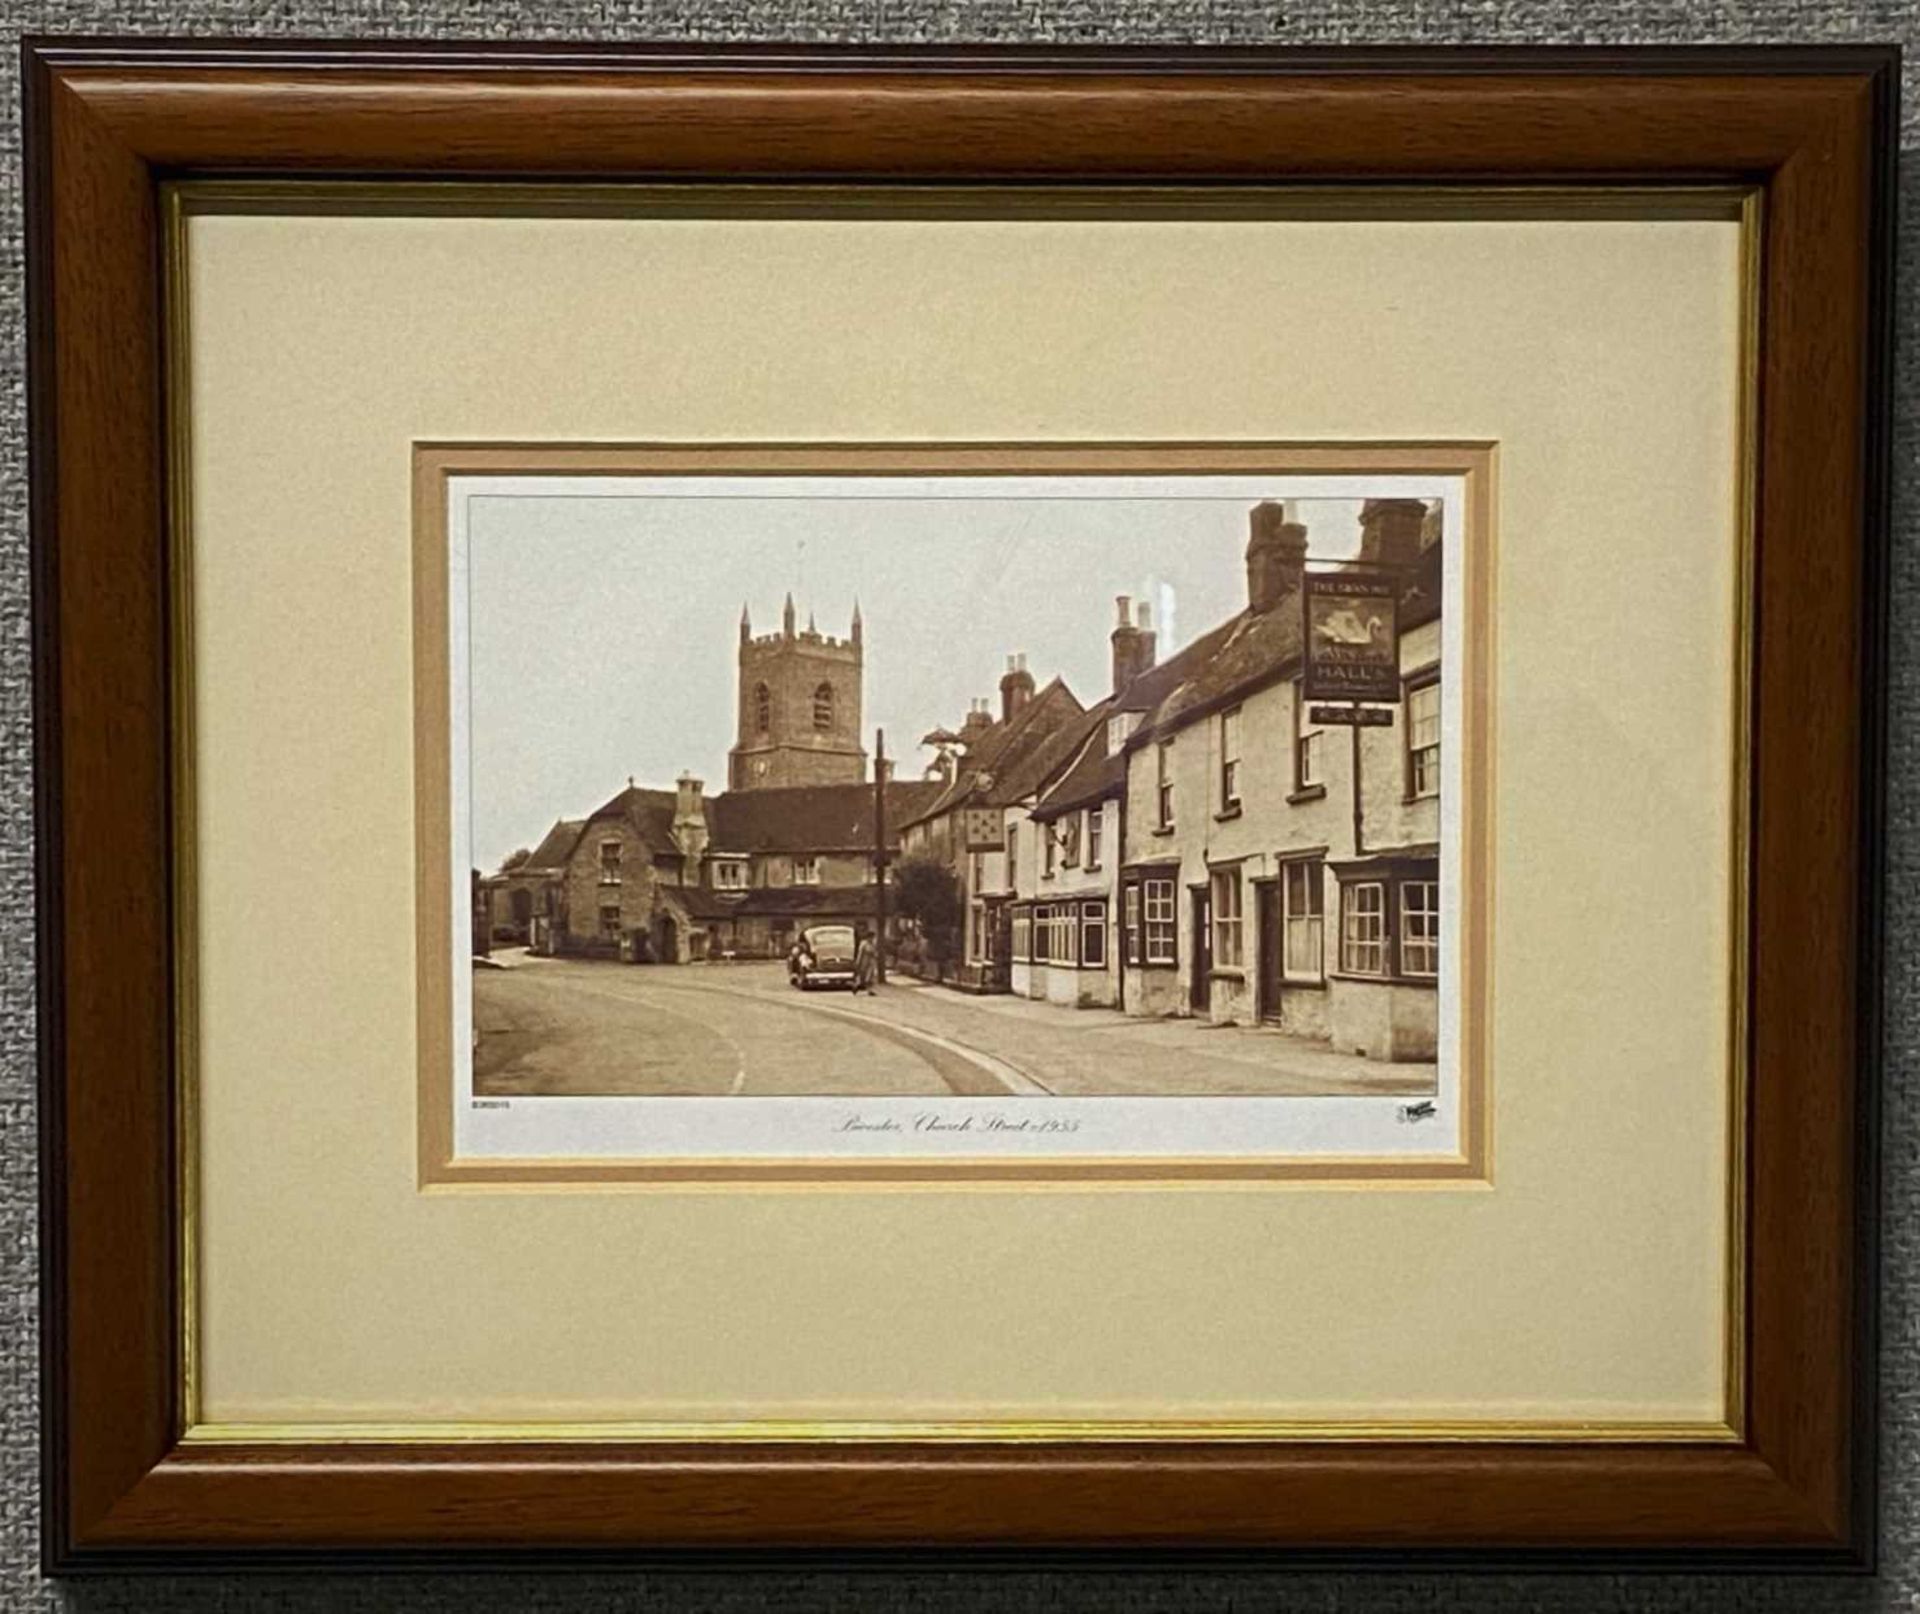 FRITH COLLECTION - CHURCH STREET BICESTER 1955. 290 x 350 mm